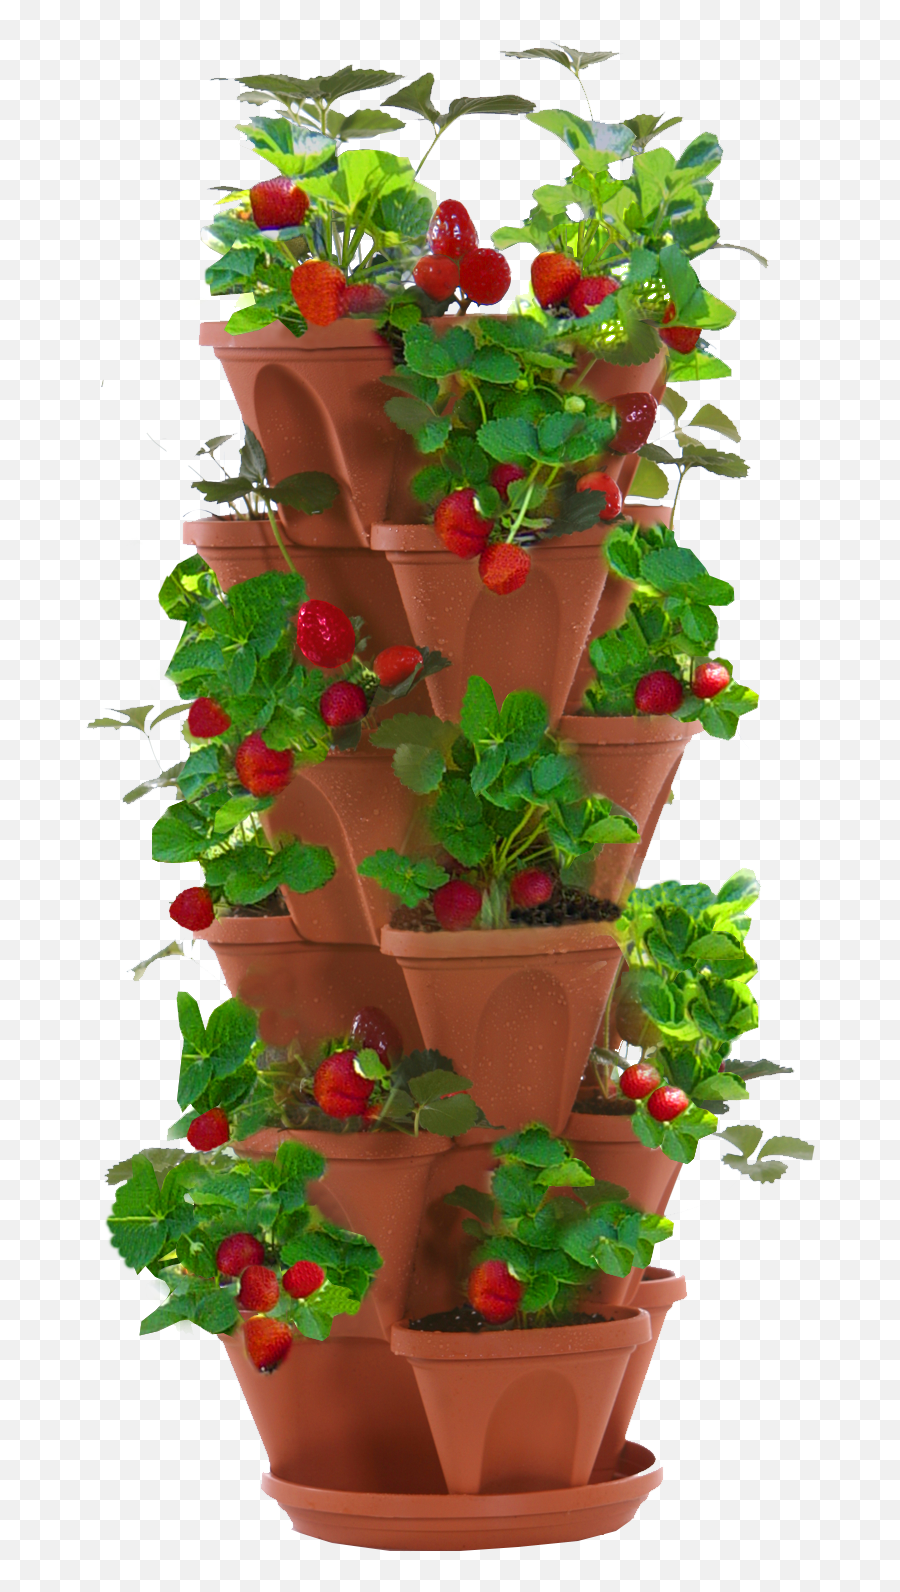 Download Strawberry Planter - Stacked Strawberry Planter Strawberry Planter Transparent Background Png,Planter Png